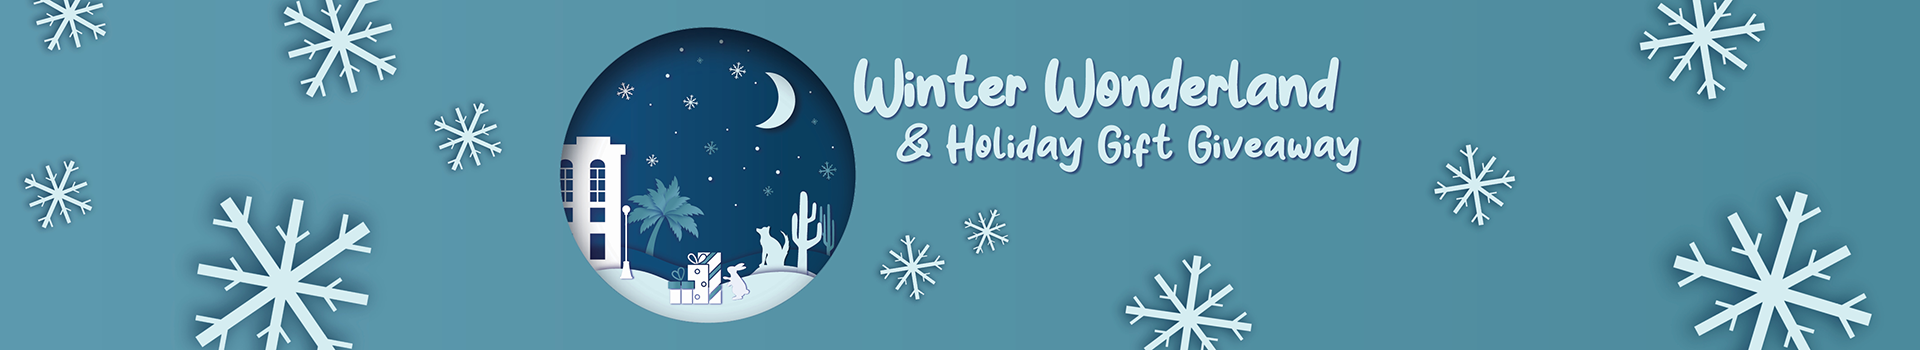 Winter Wonderland and Holiday Gift Giveaway